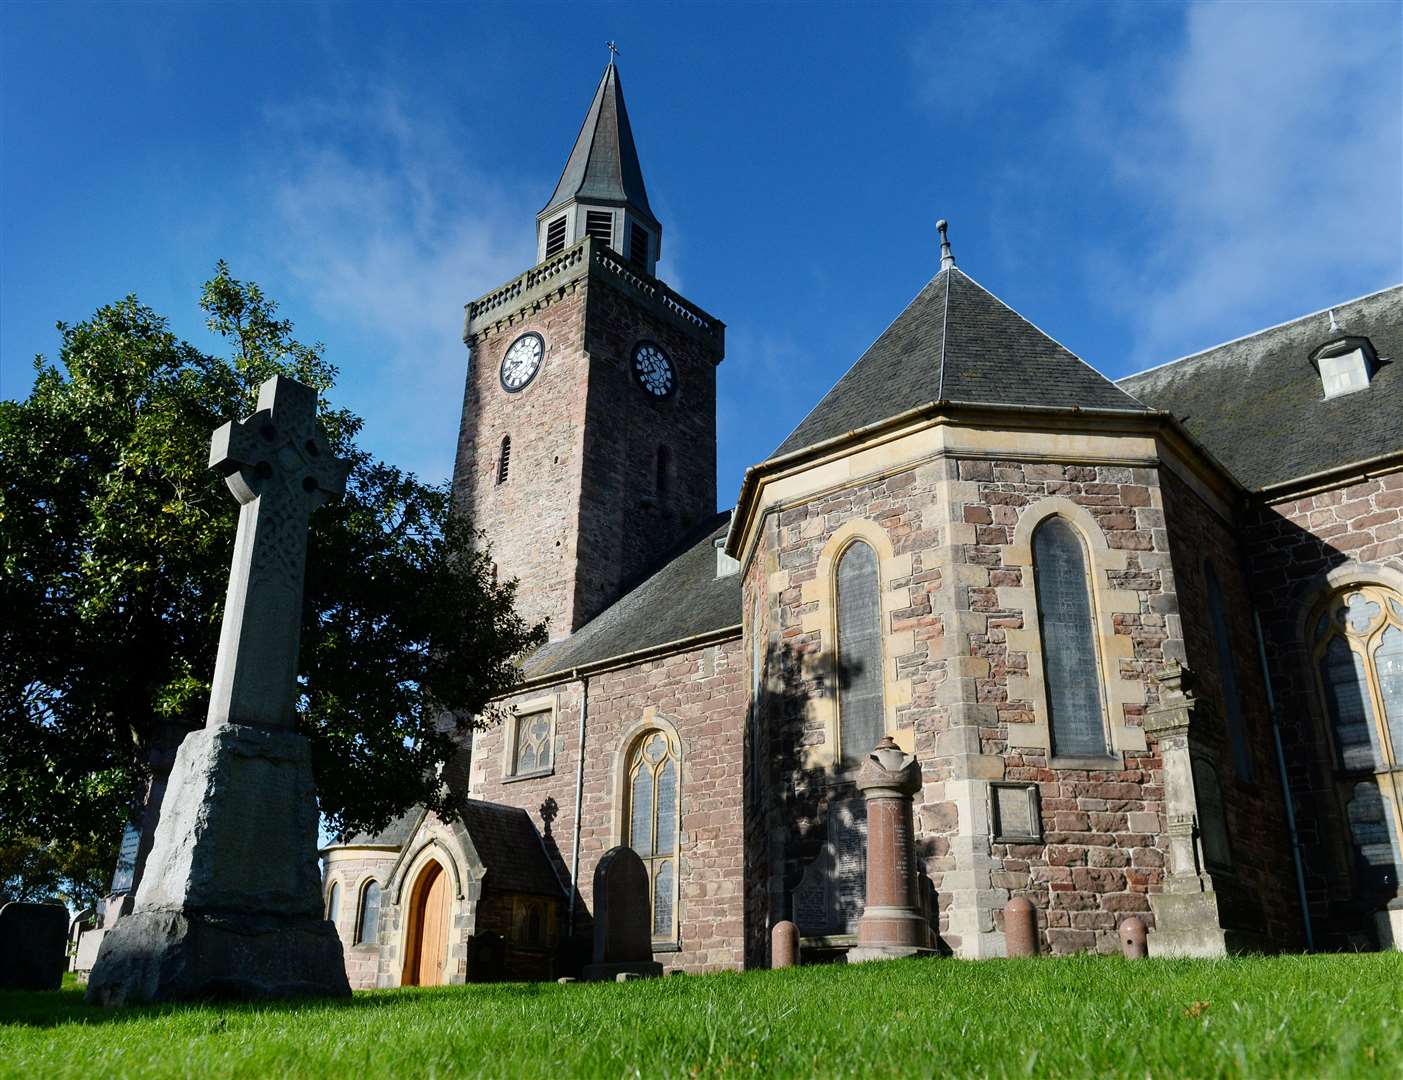 The Old High Church was requisitioned by government forces to house Jacobite prisoners captured at the Battle of Culloden.